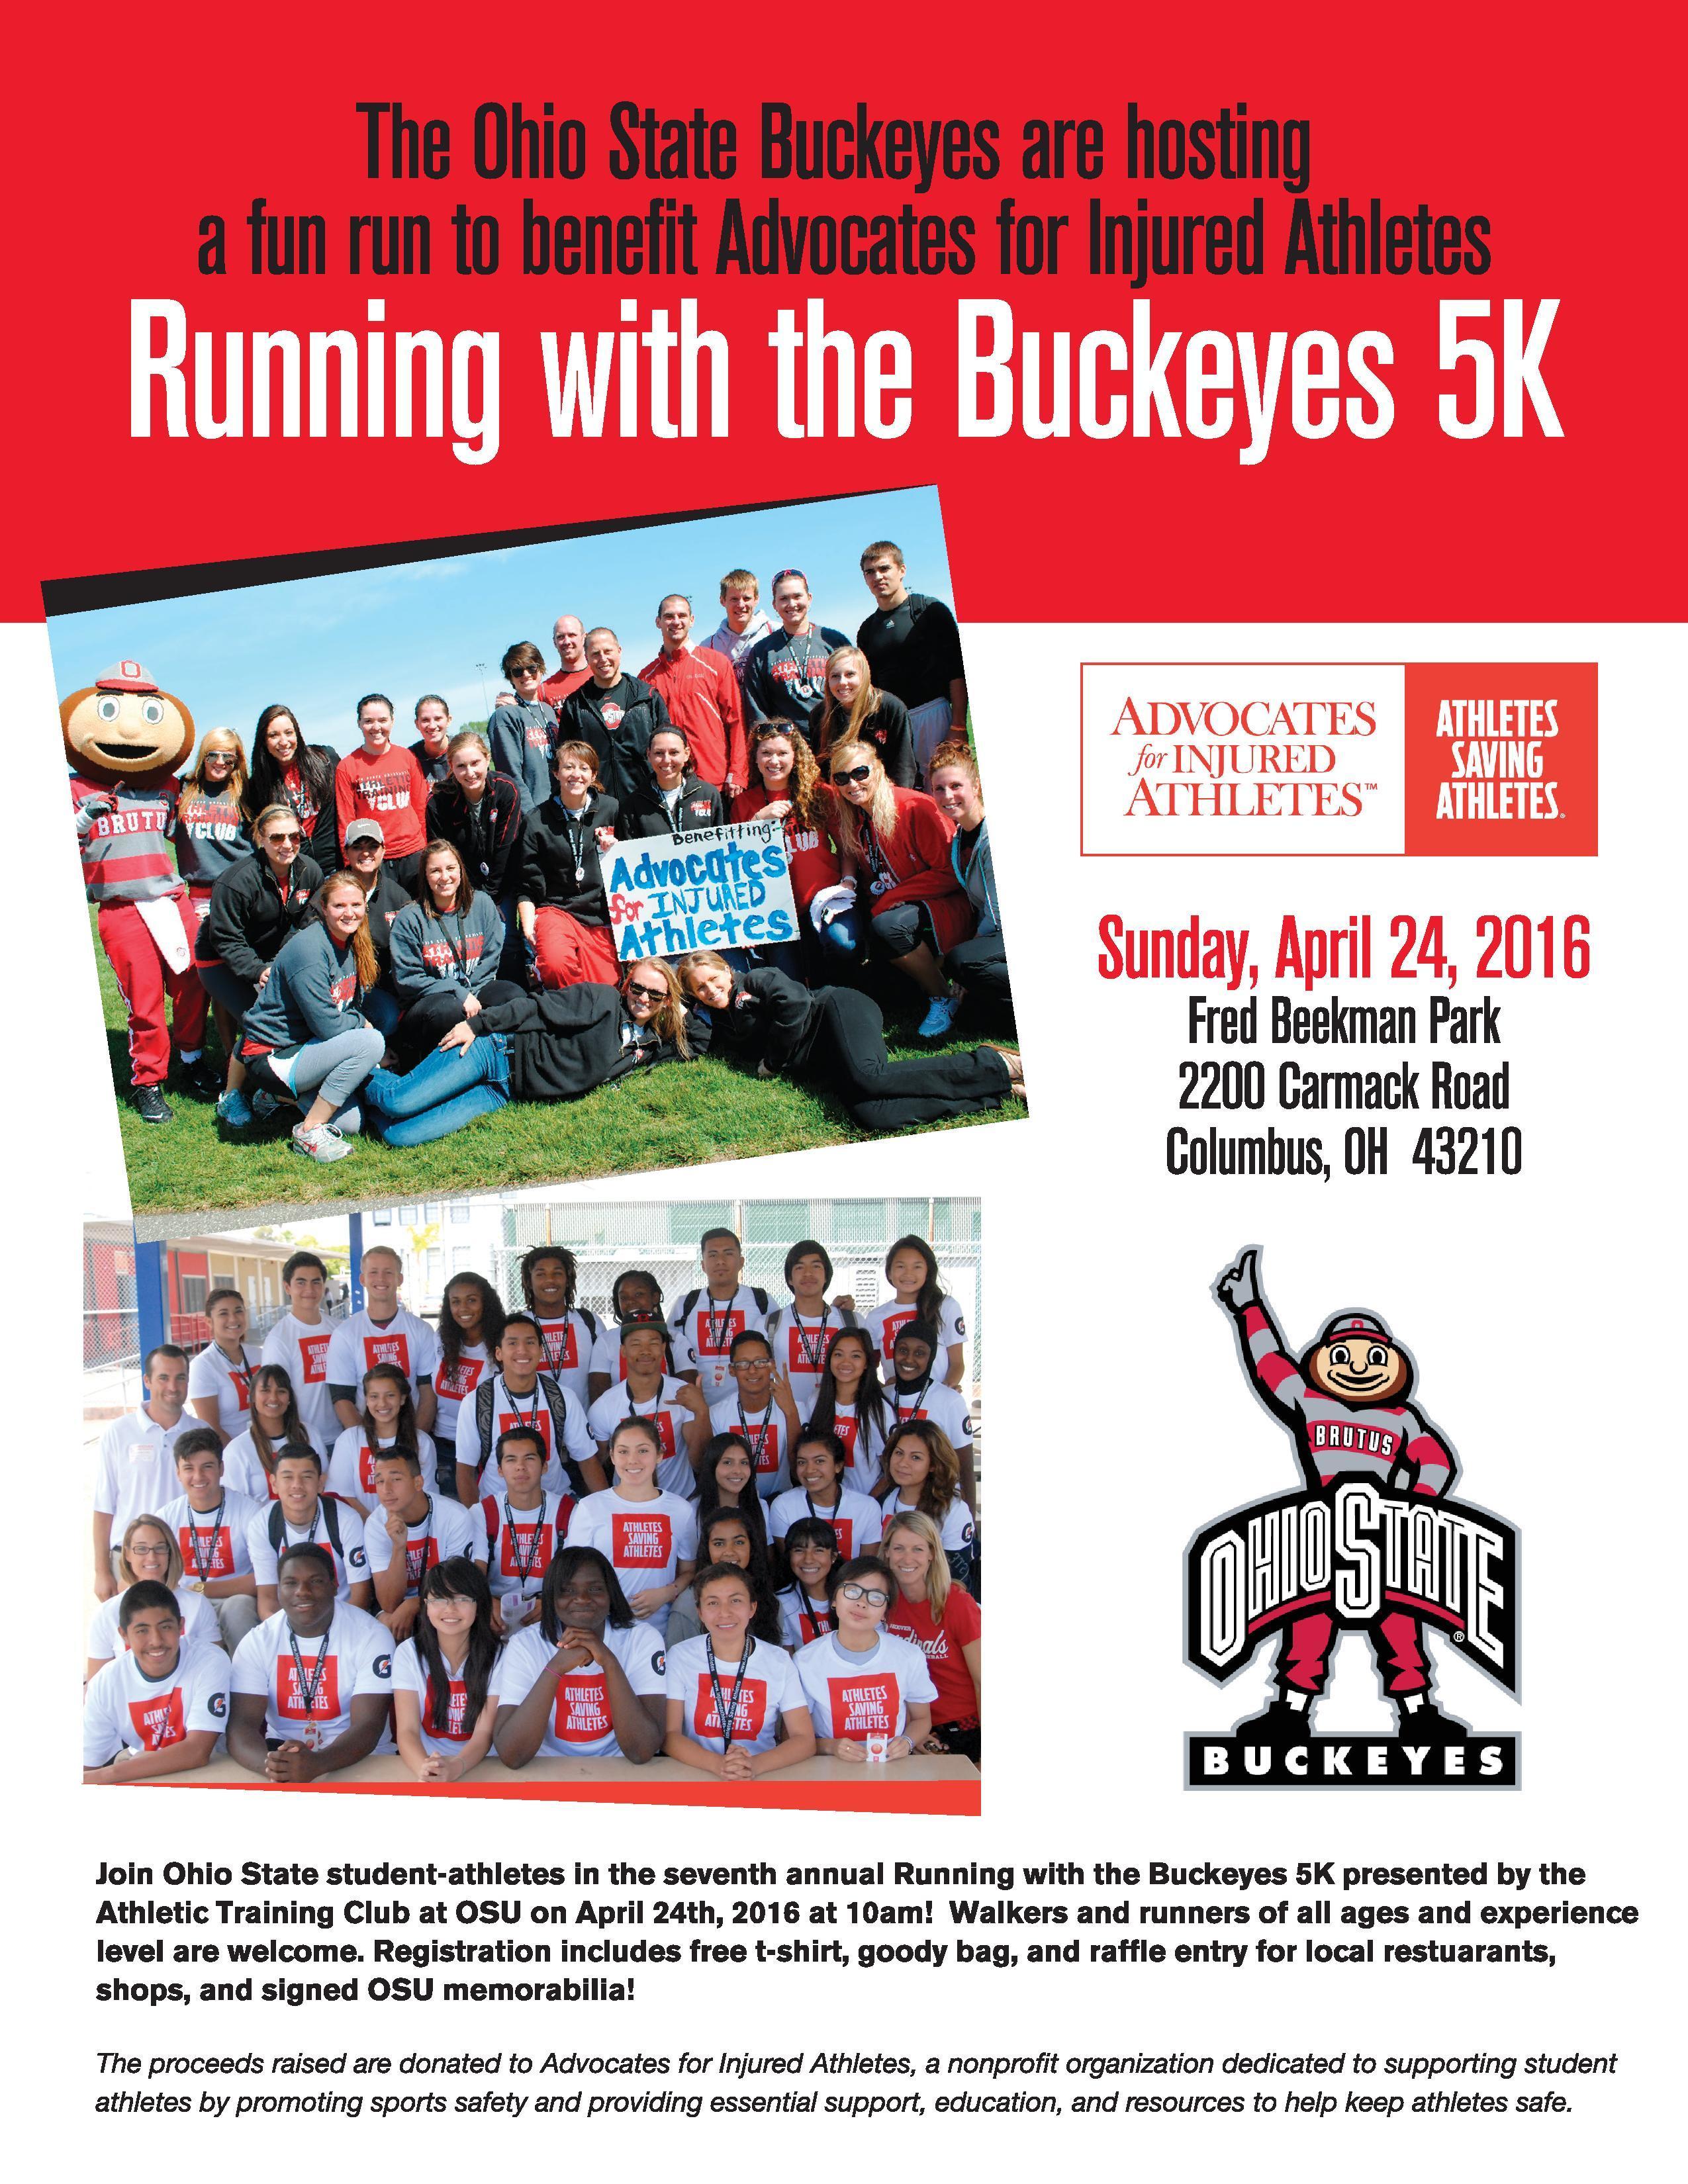 Running with the Buckeyes 5K Image